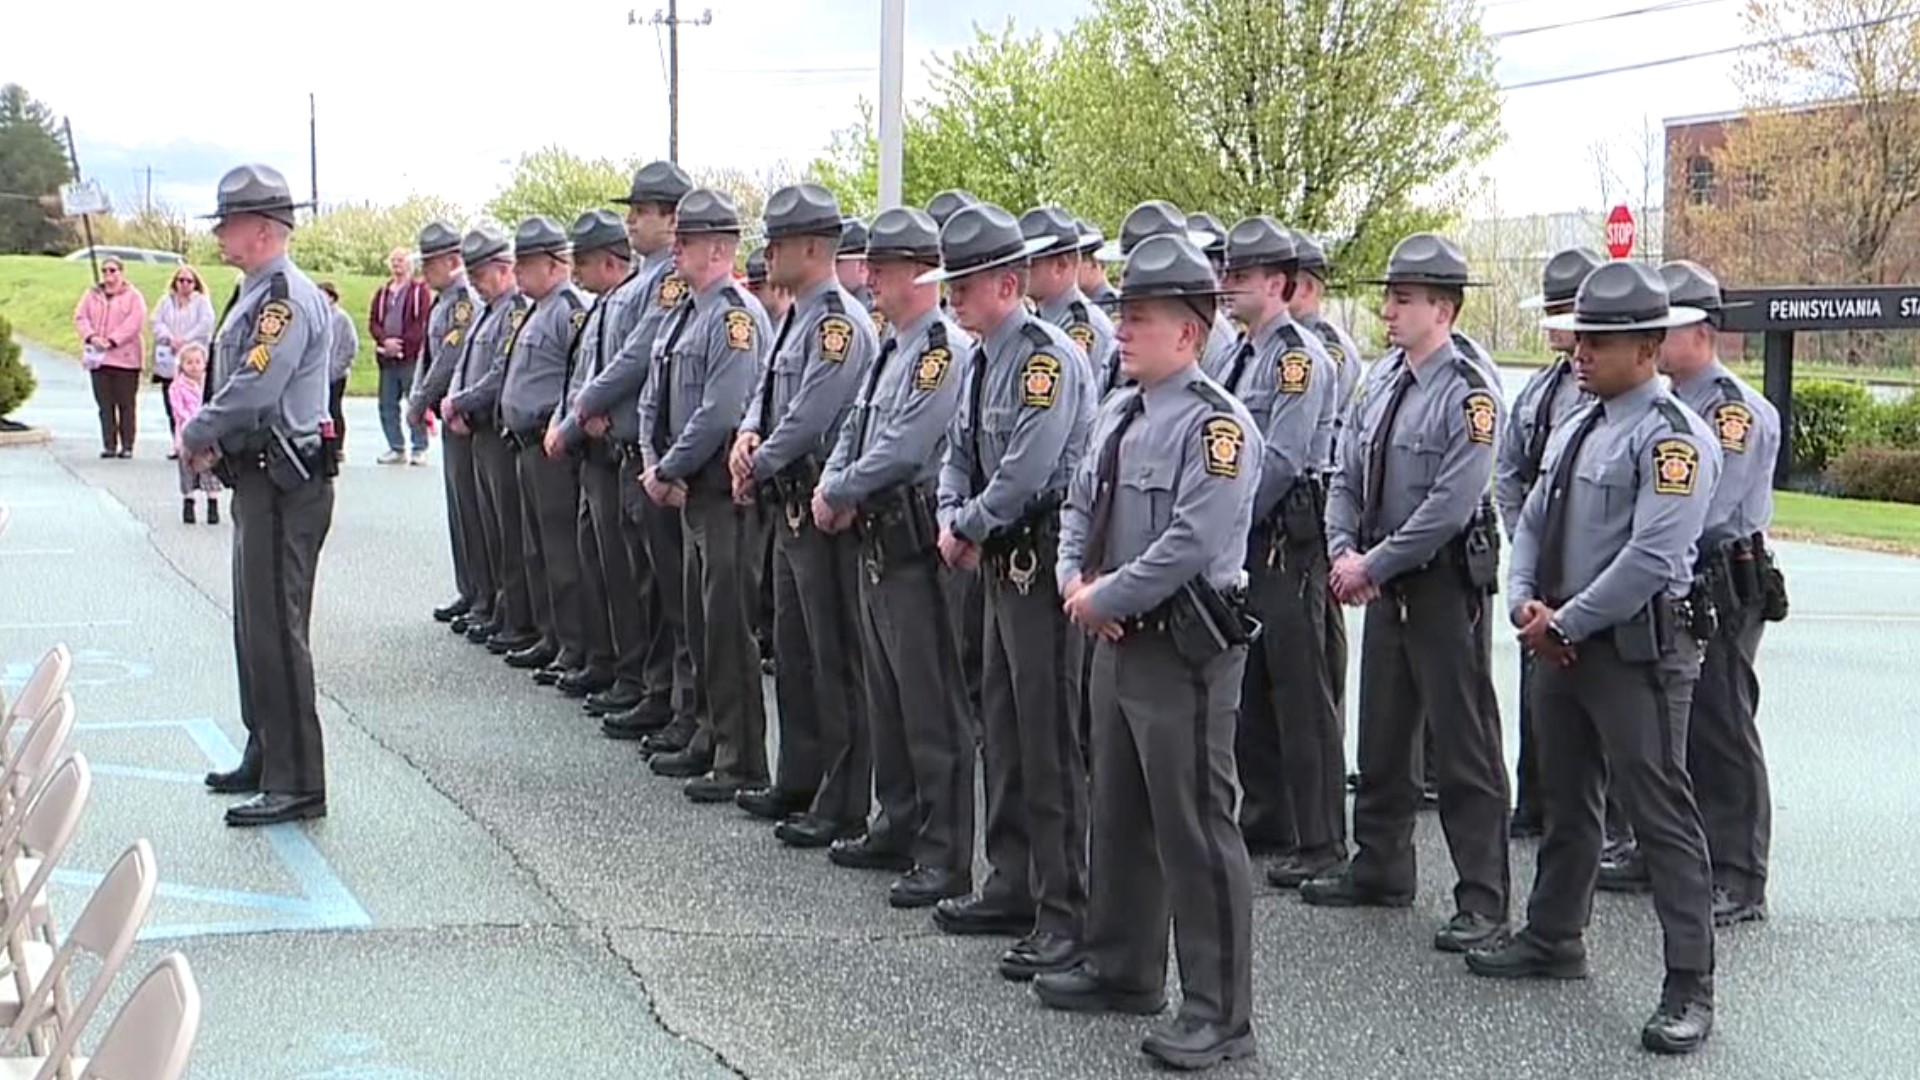 State police in Luzerne County held a ceremony Tuesday to honor troopers who have been killed in the line of duty as well as other law enforcement officers.